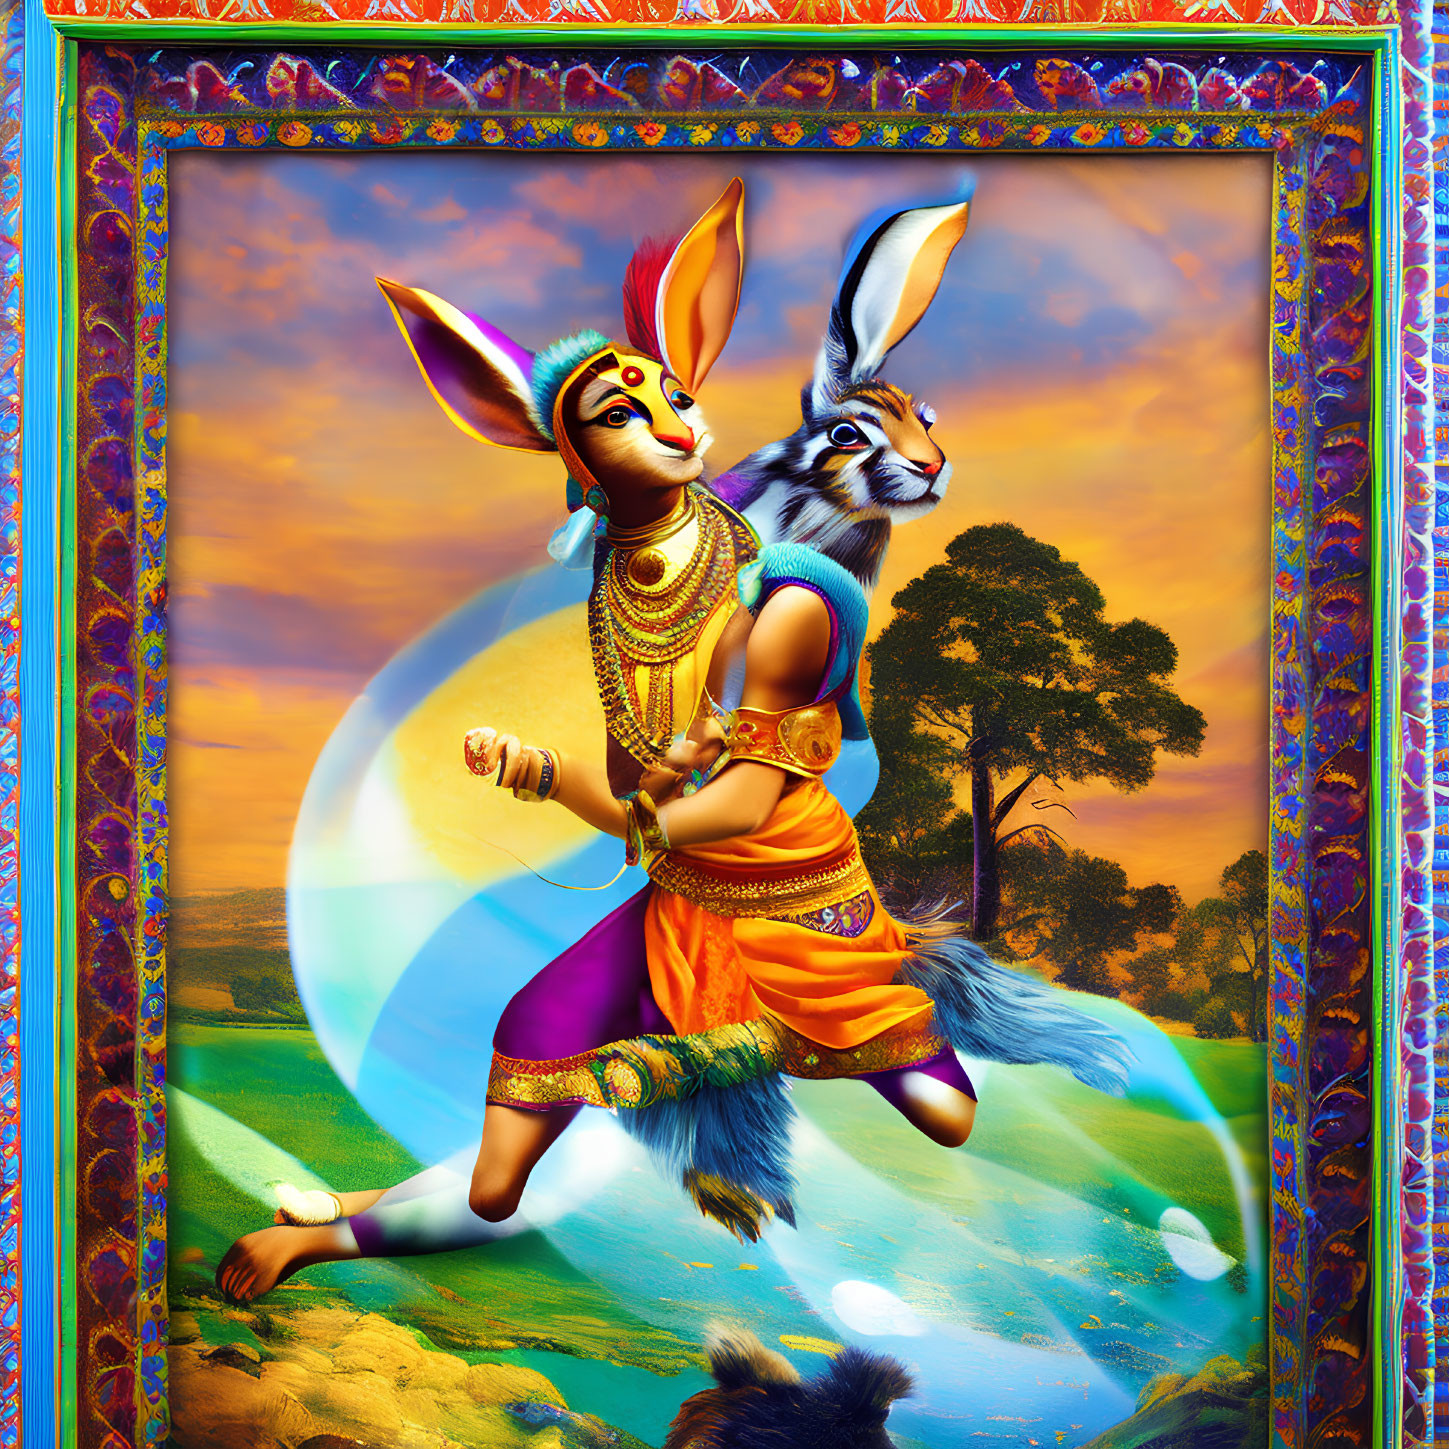 Vibrant Lord Hanuman with rabbit head in Indian attire against colorful backdrop